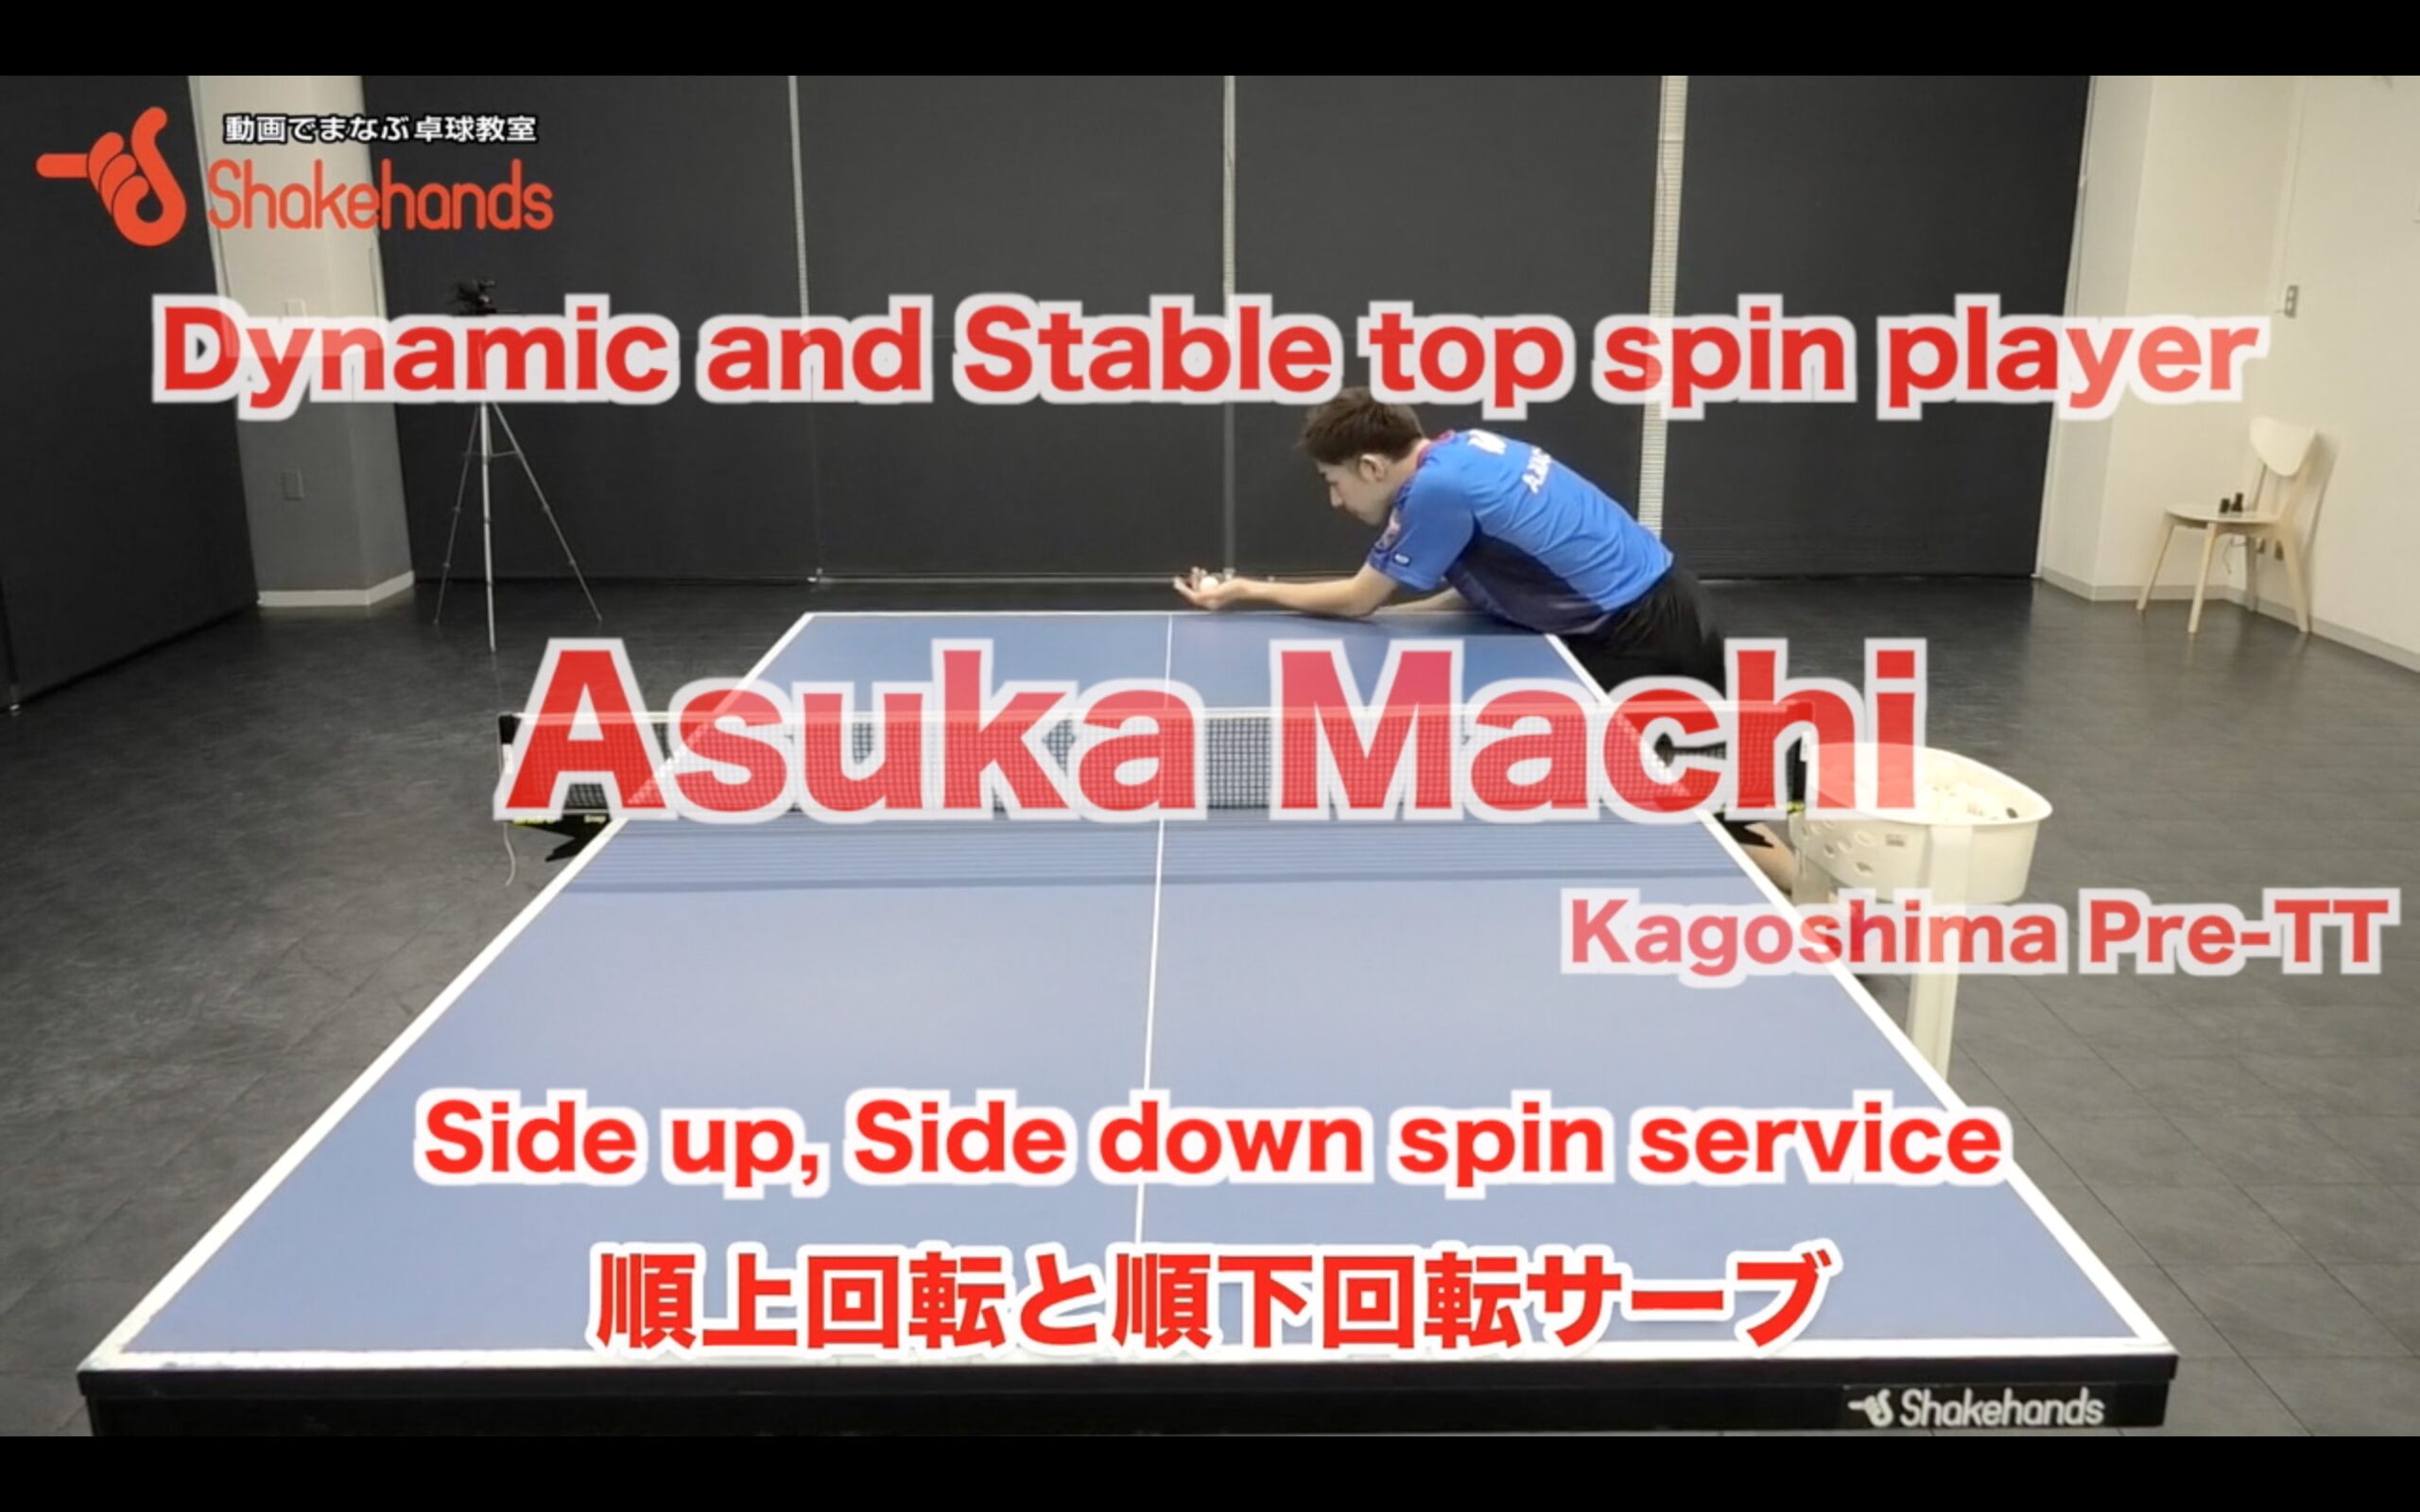 Side up and side down spin service